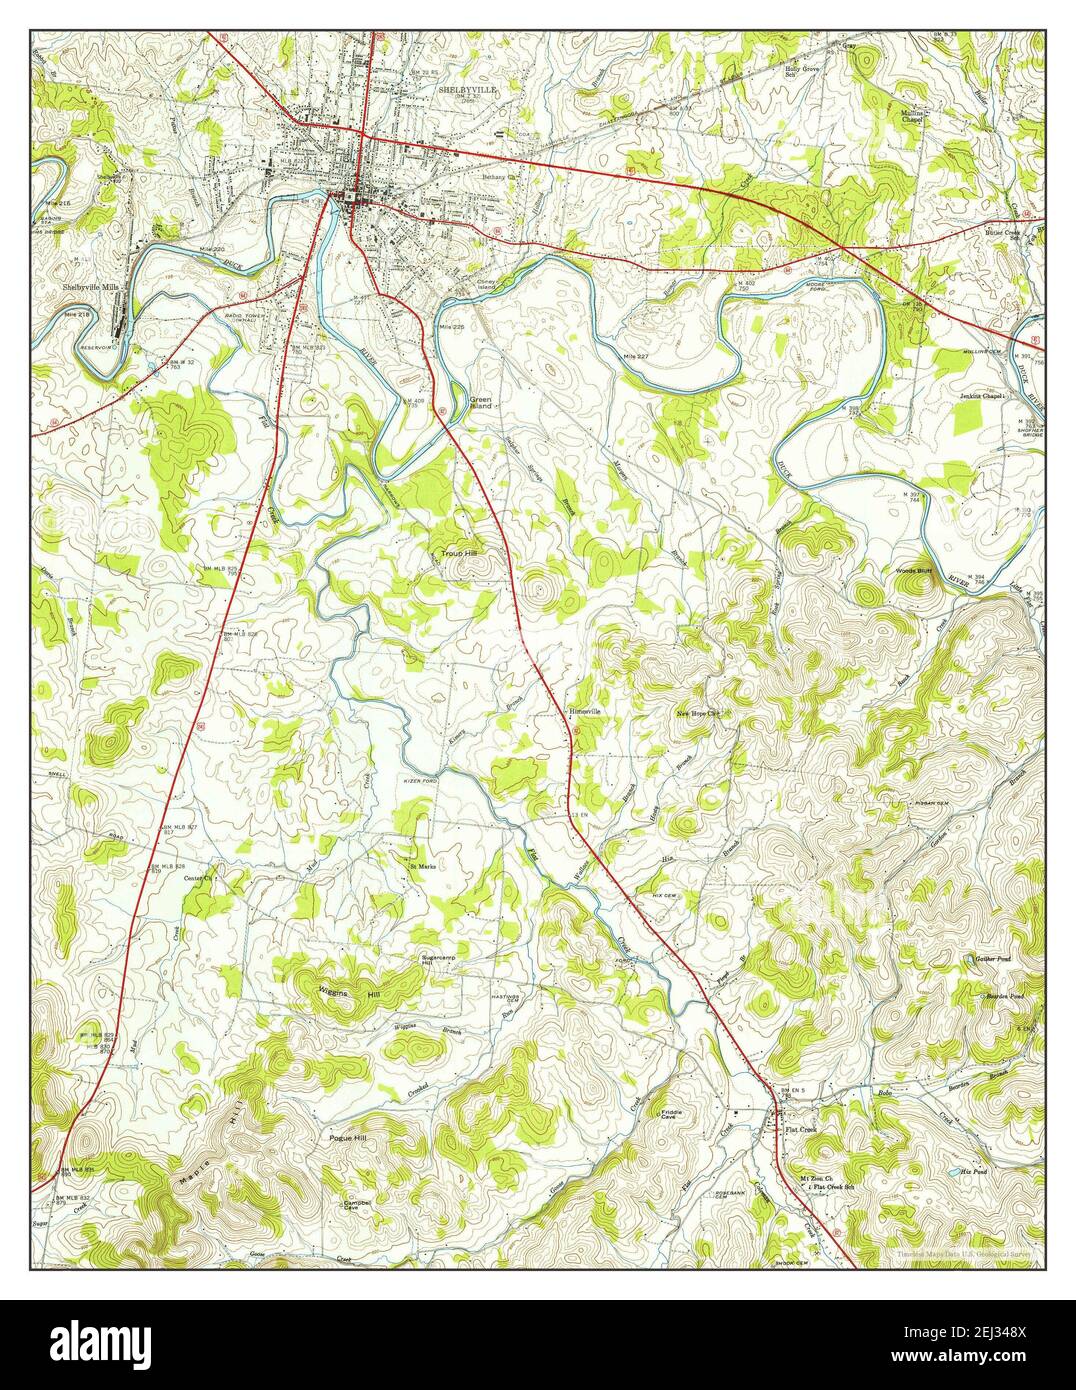 Shelbyville, Tennessee, map 1947, 1:24000, United States of America by ...